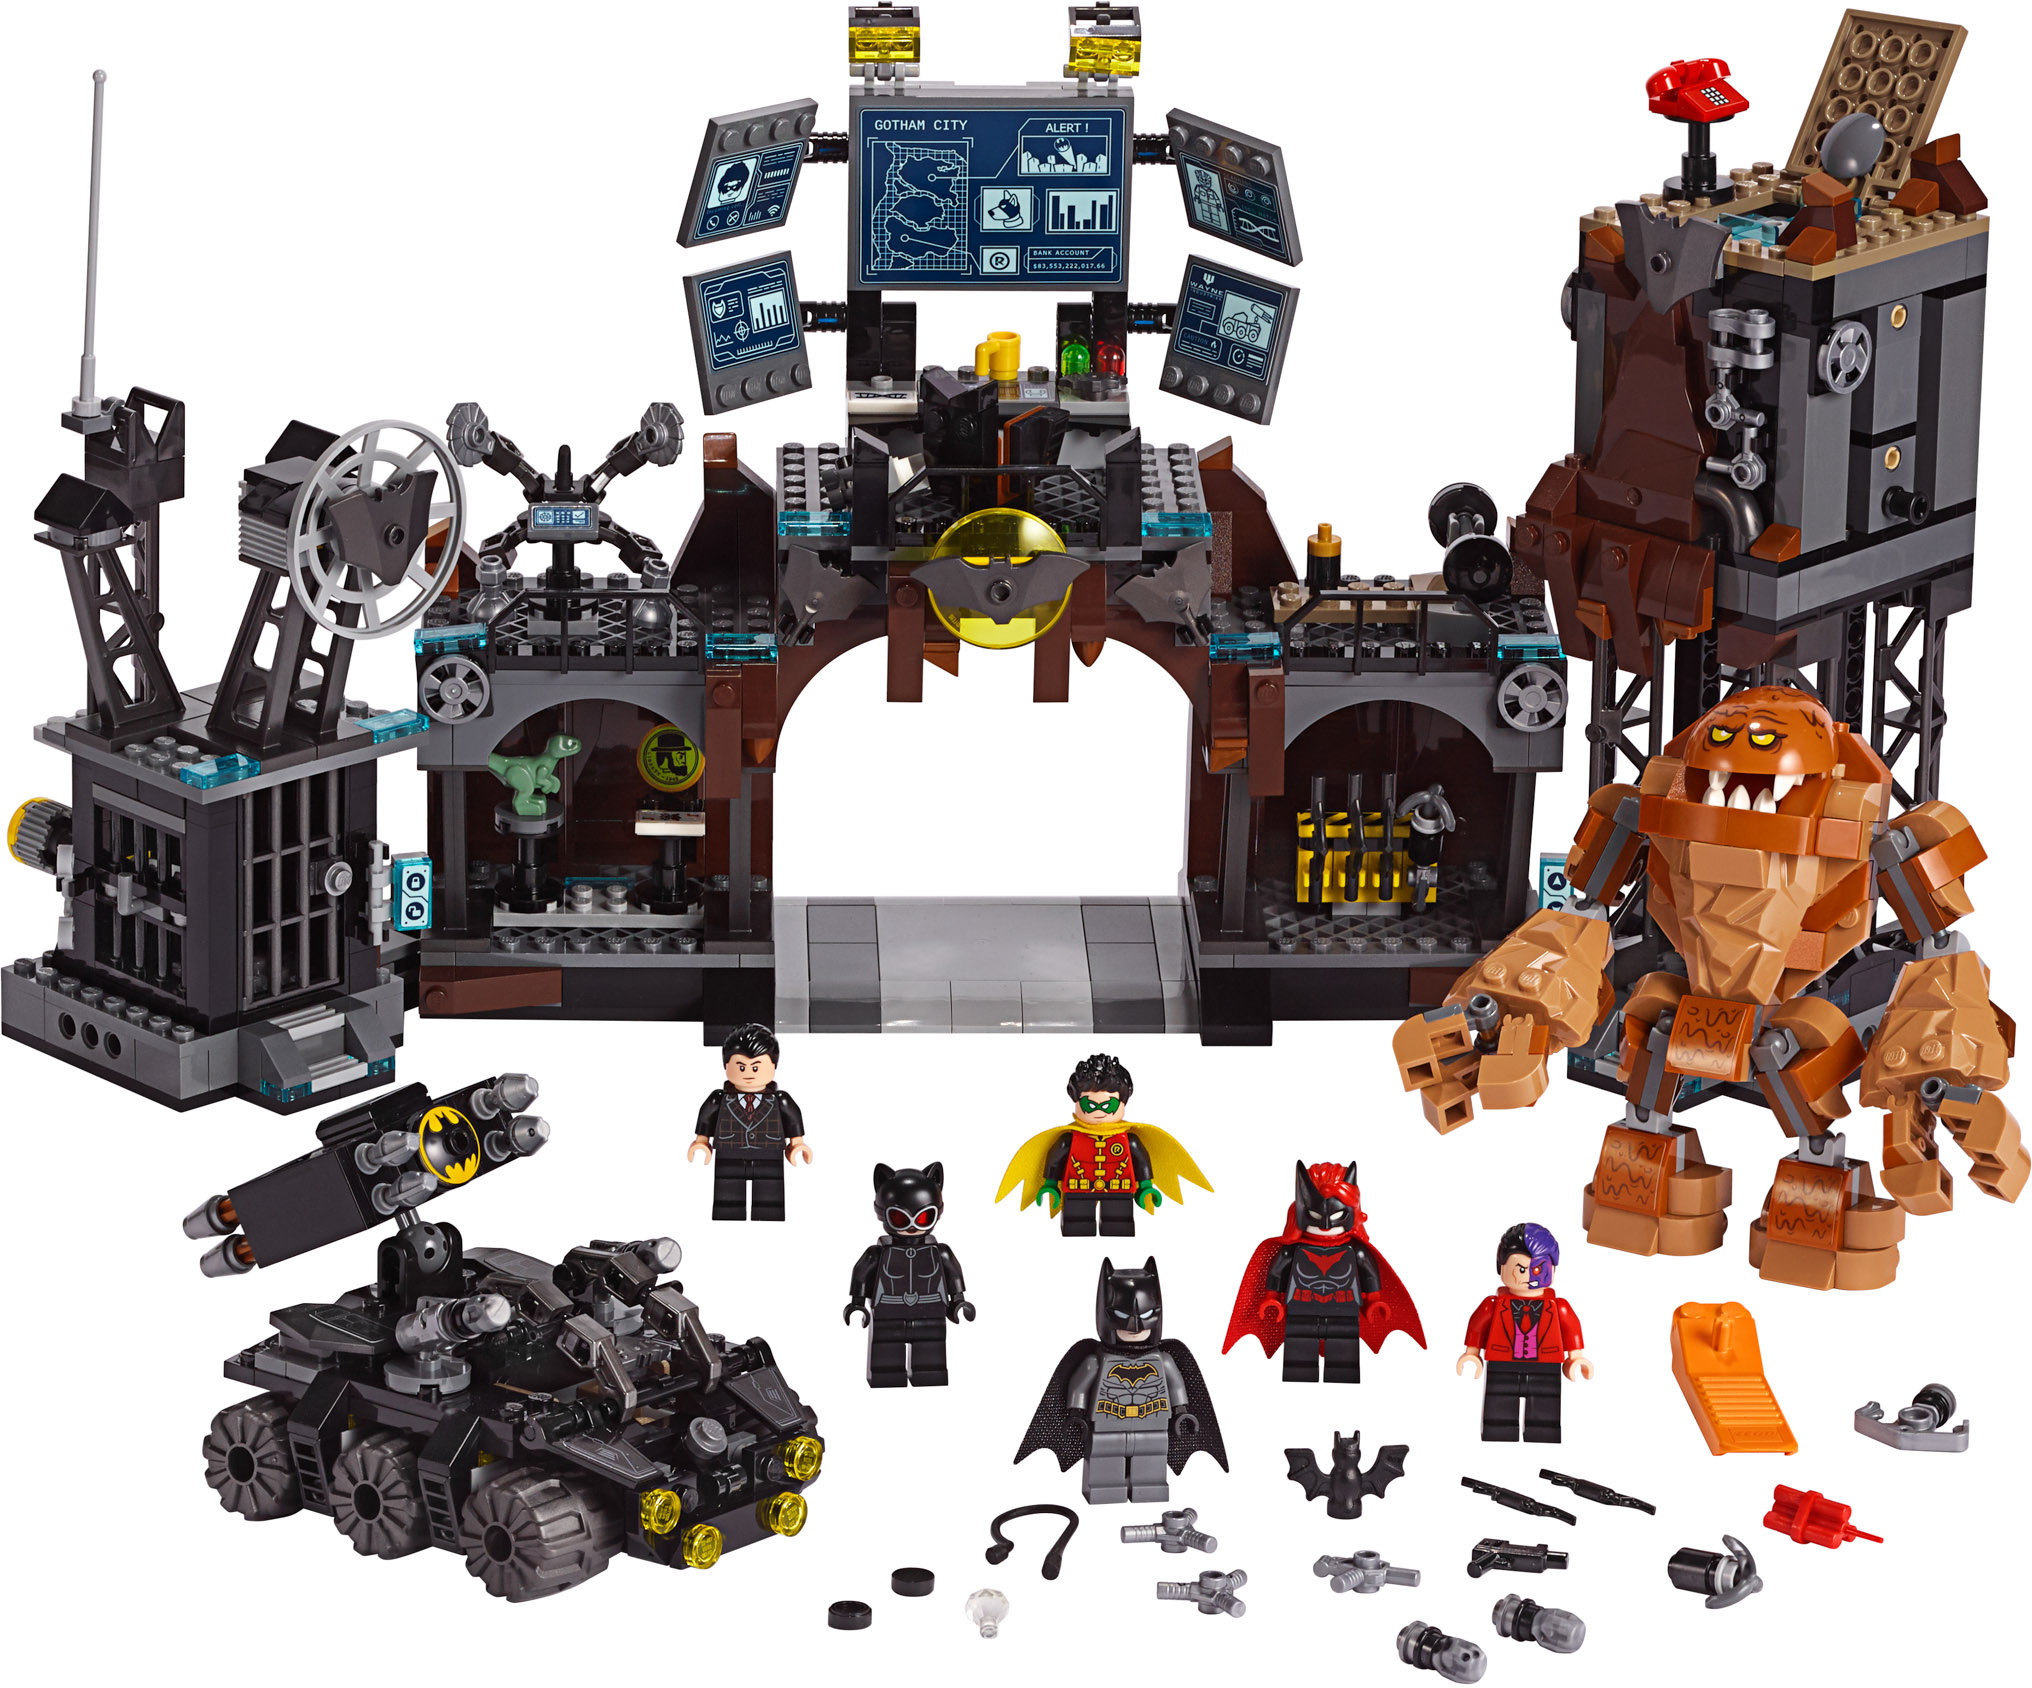 Bricker - Construction Toy by LEGO 76122 Batcave Clayface Invasion